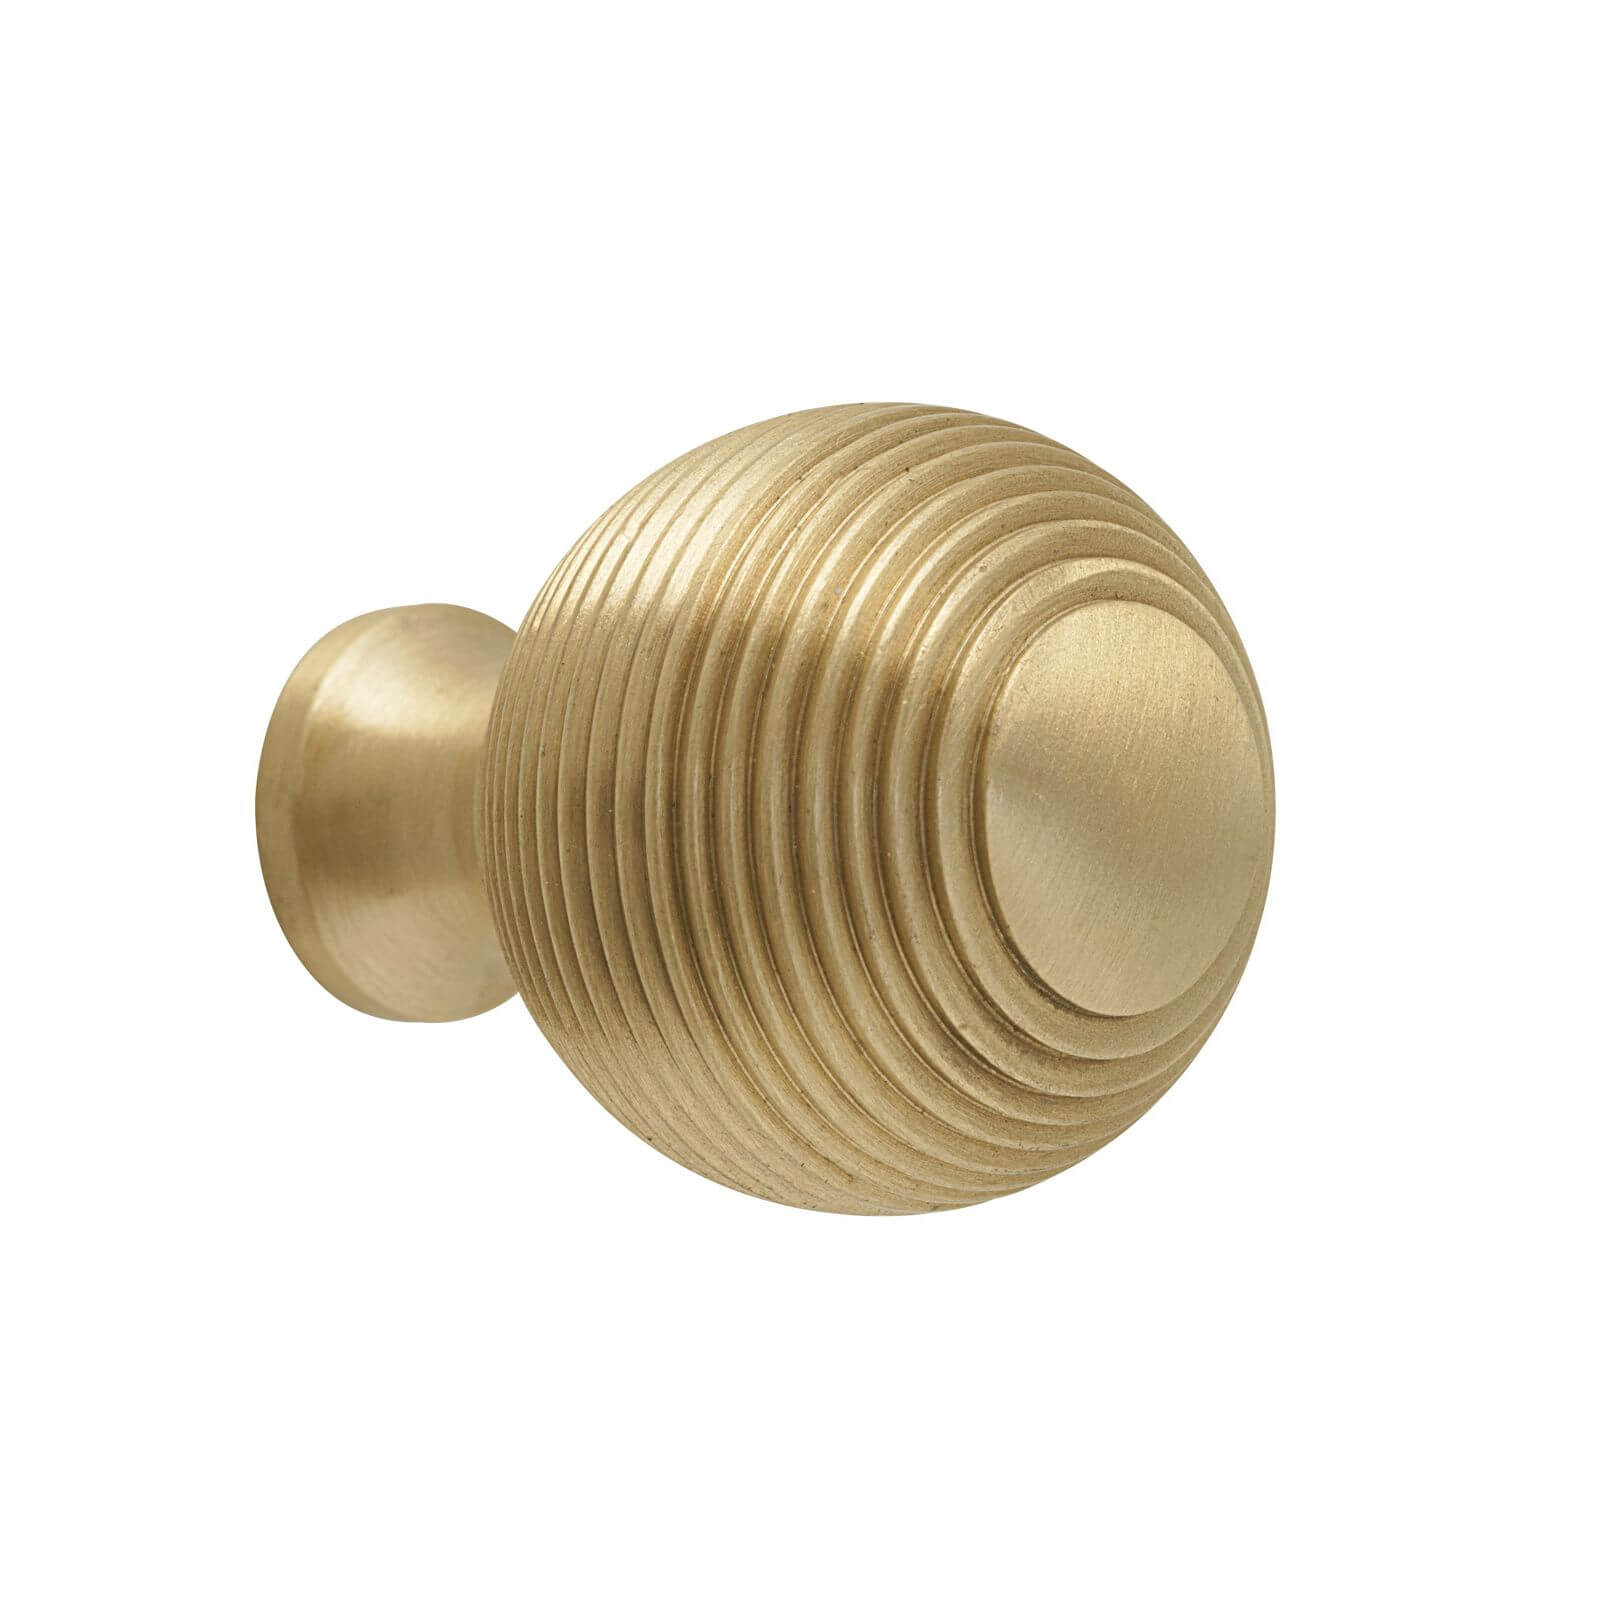 Reeded Solid Ball Knob Brushed Brass